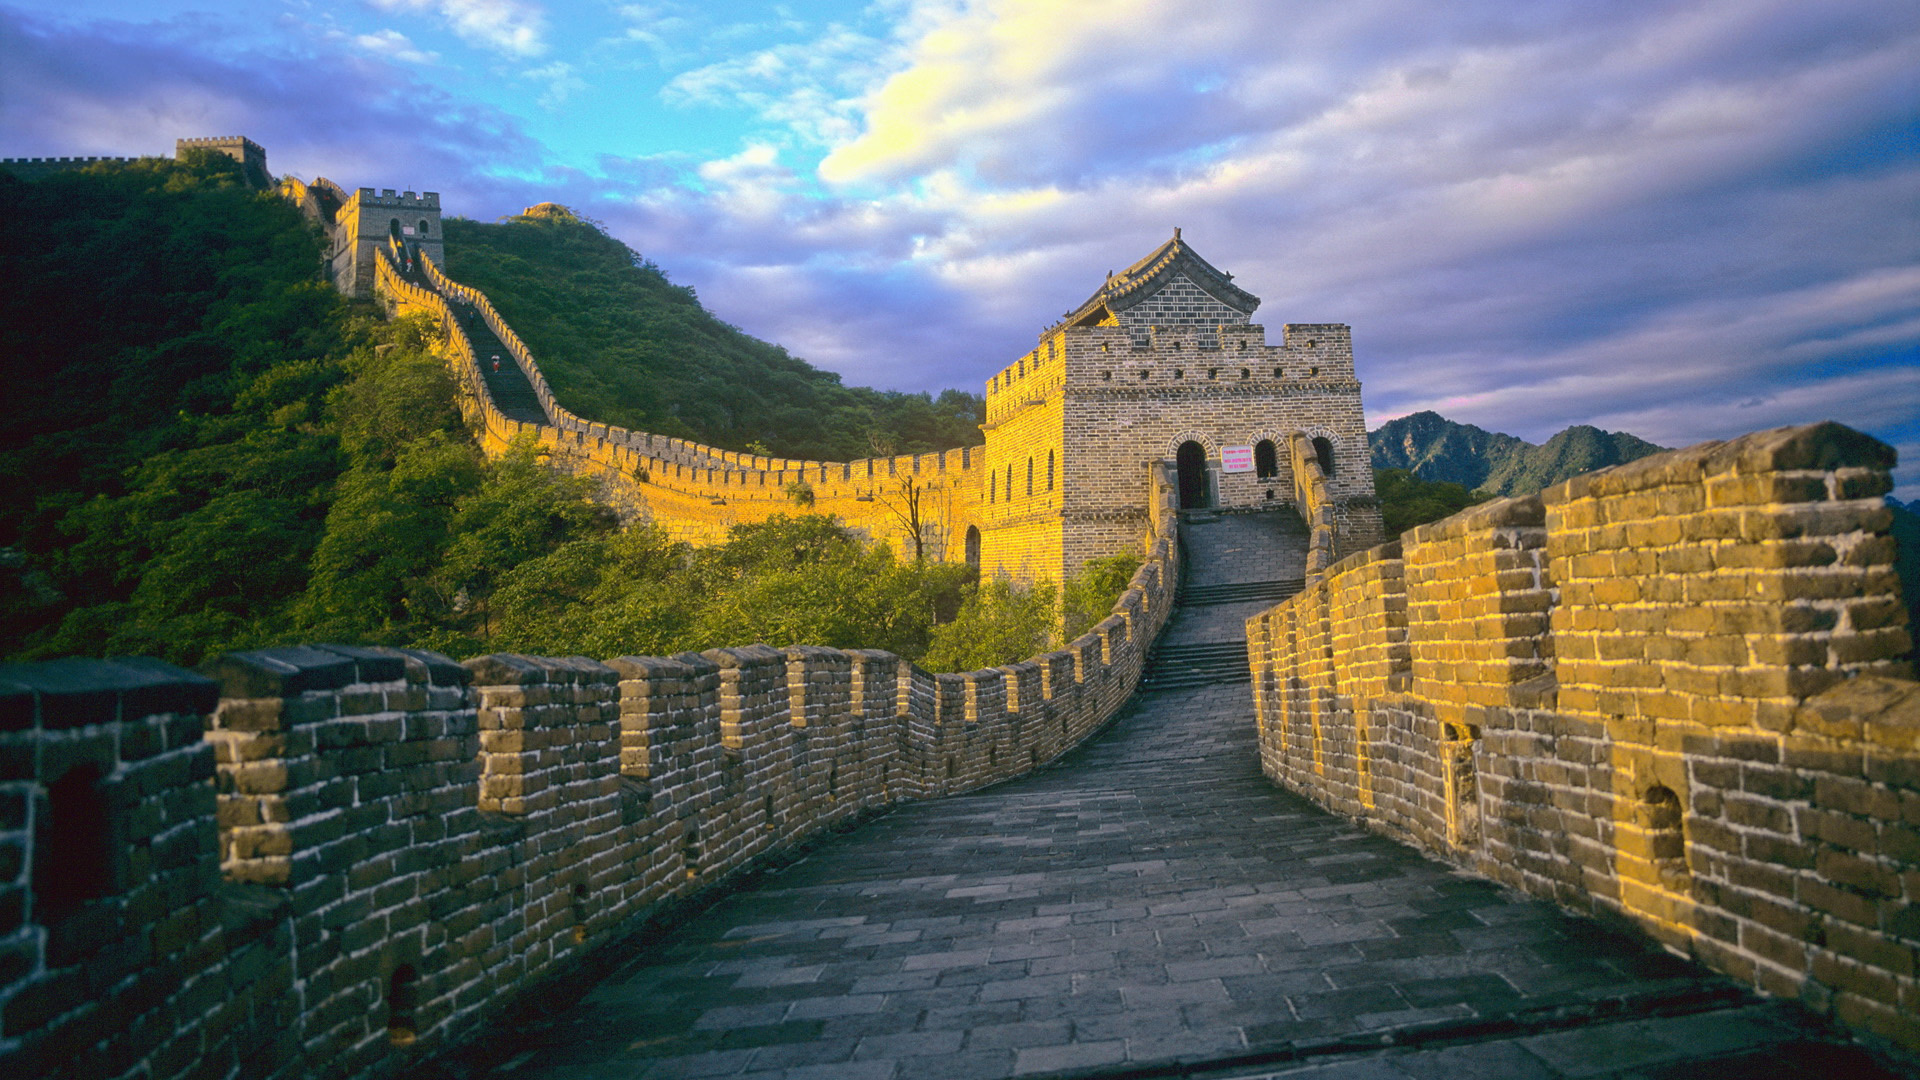 General 1920x1080 nature landscape Great Wall of China China wall bricks tower film grain photography clouds mountains sky sunlight POV